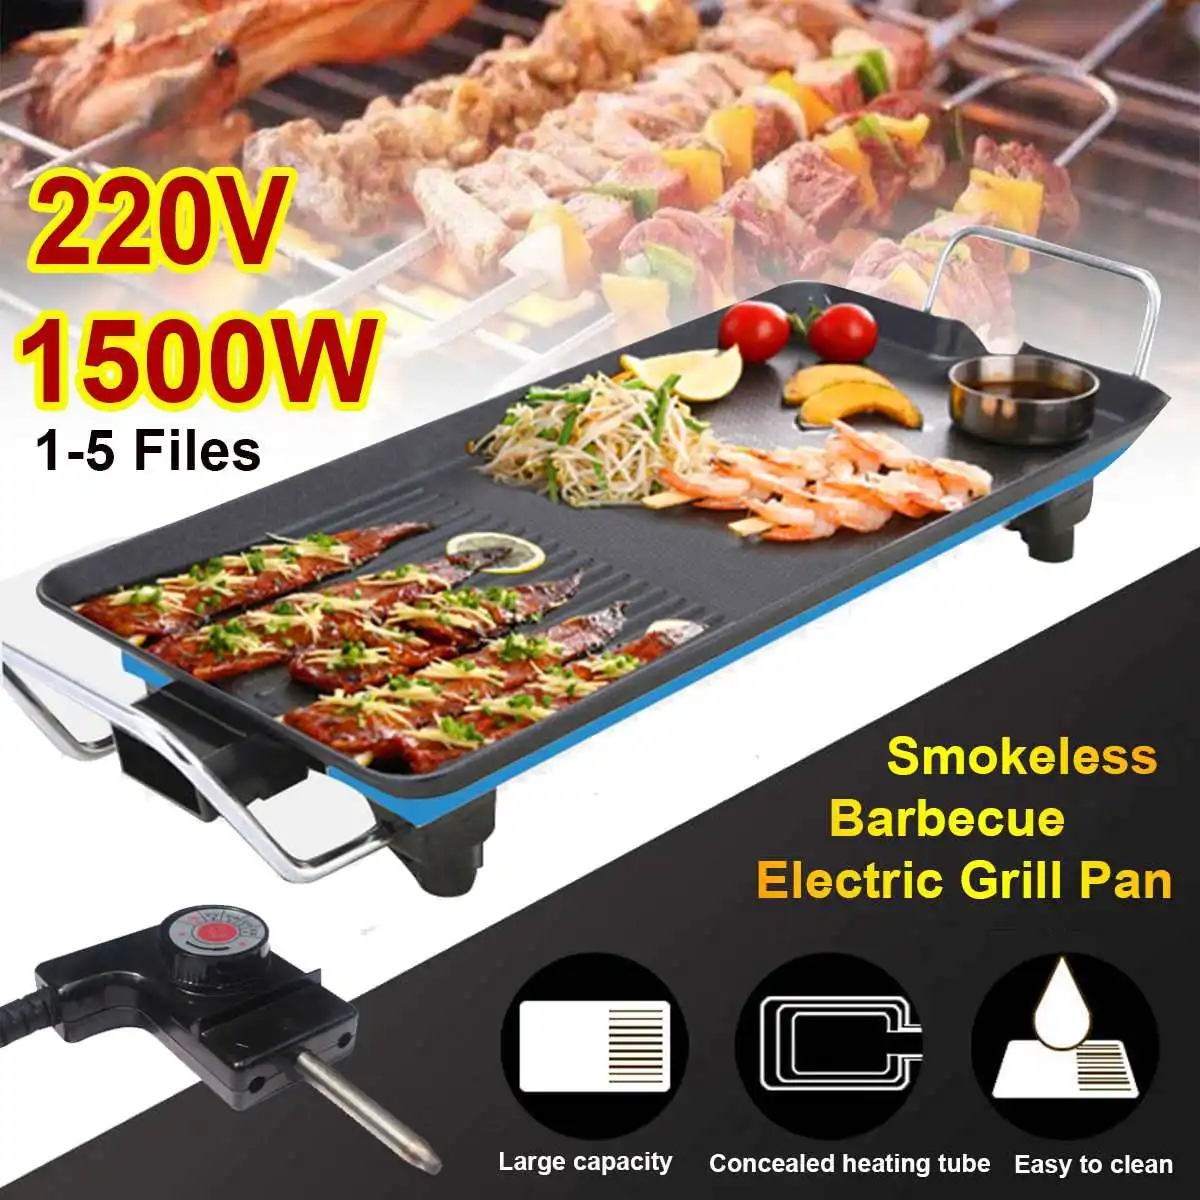 Electric Barbecue Pan Non-Stick Electric Grill Smokeless Aluminum Alloy Electric Baking Pan Teppanyaki Grill Indoor Baking Tray with 220V UK Plug 